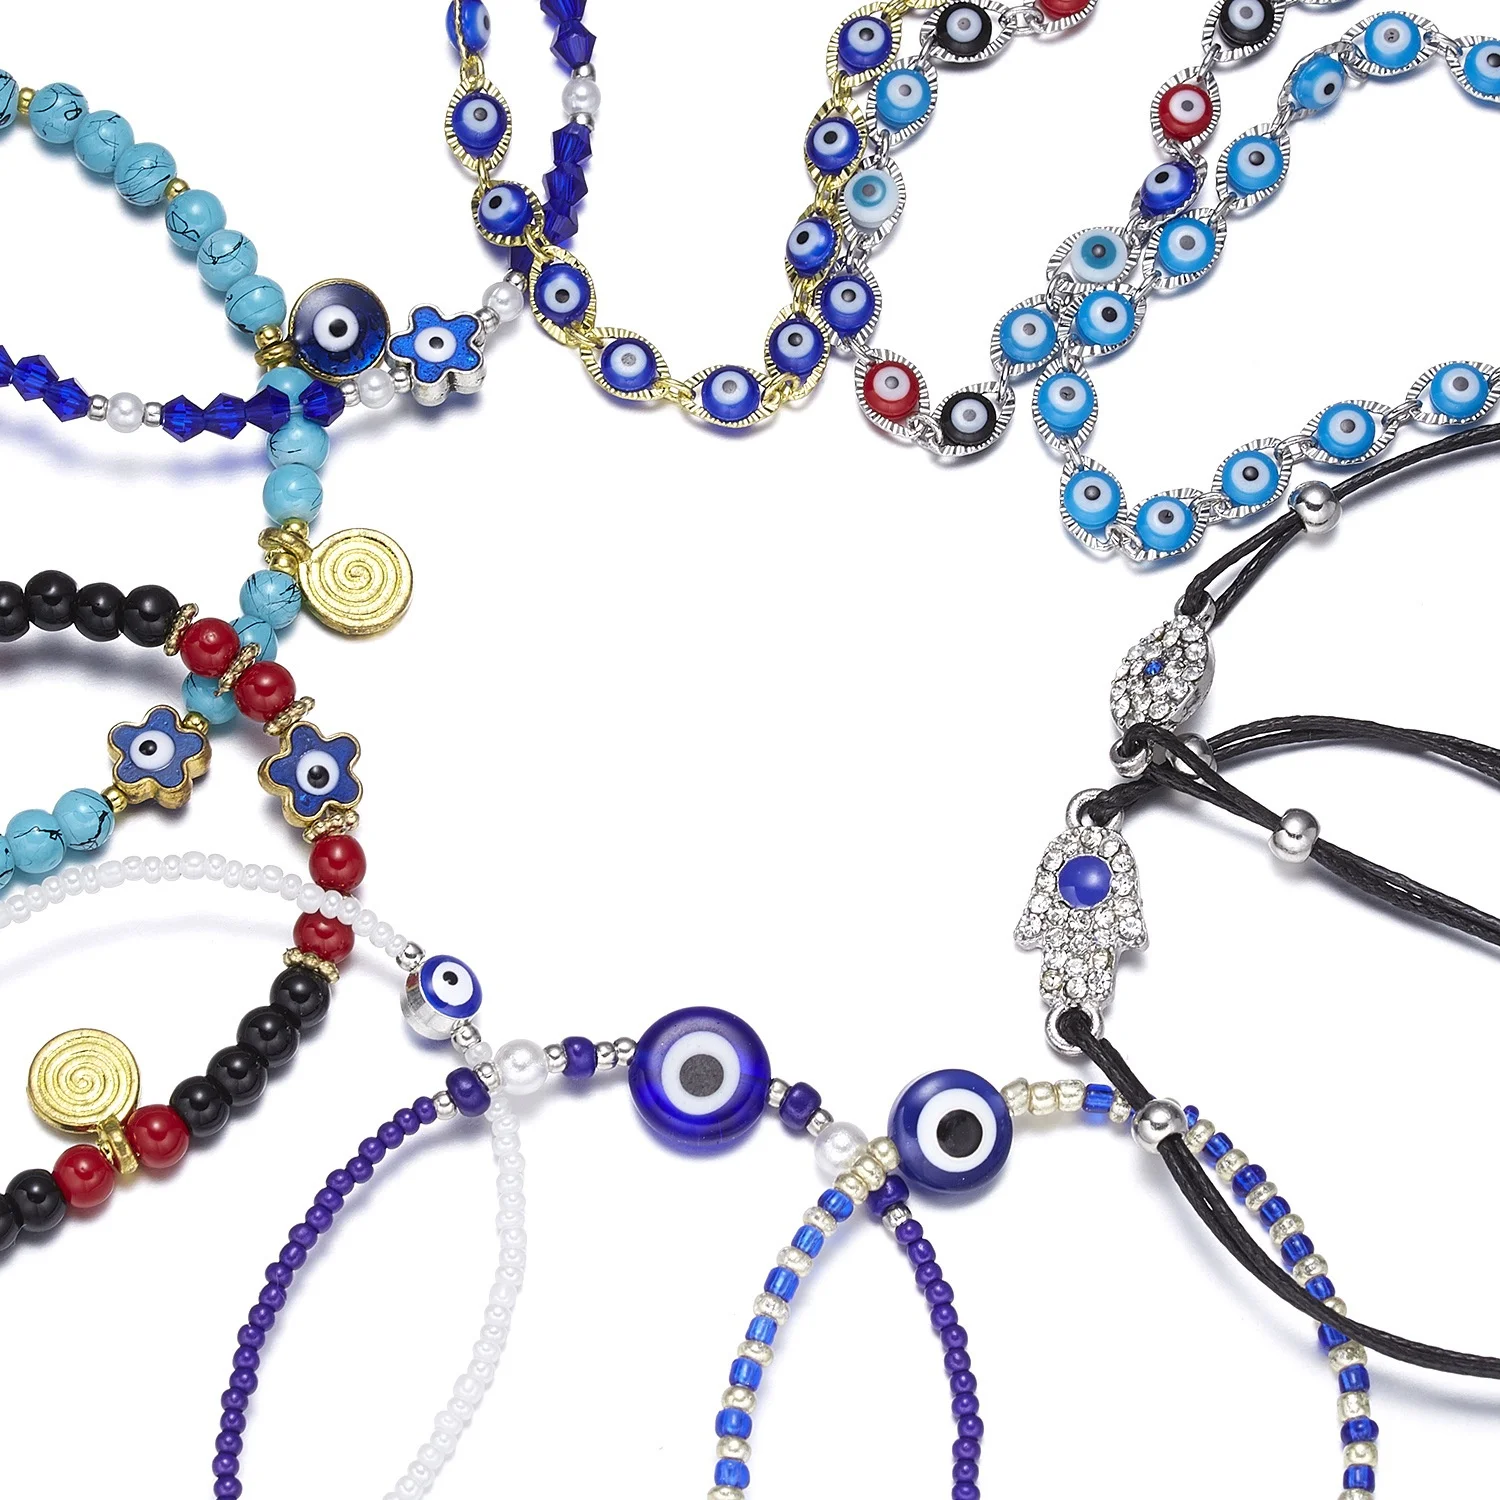 

2022 Fashion Jewelry Adjustable Chain Colorful Seed Beaded Evil Eyes Bracelet Blue Crystal Eye Beads Bracelet For Girls, As shown